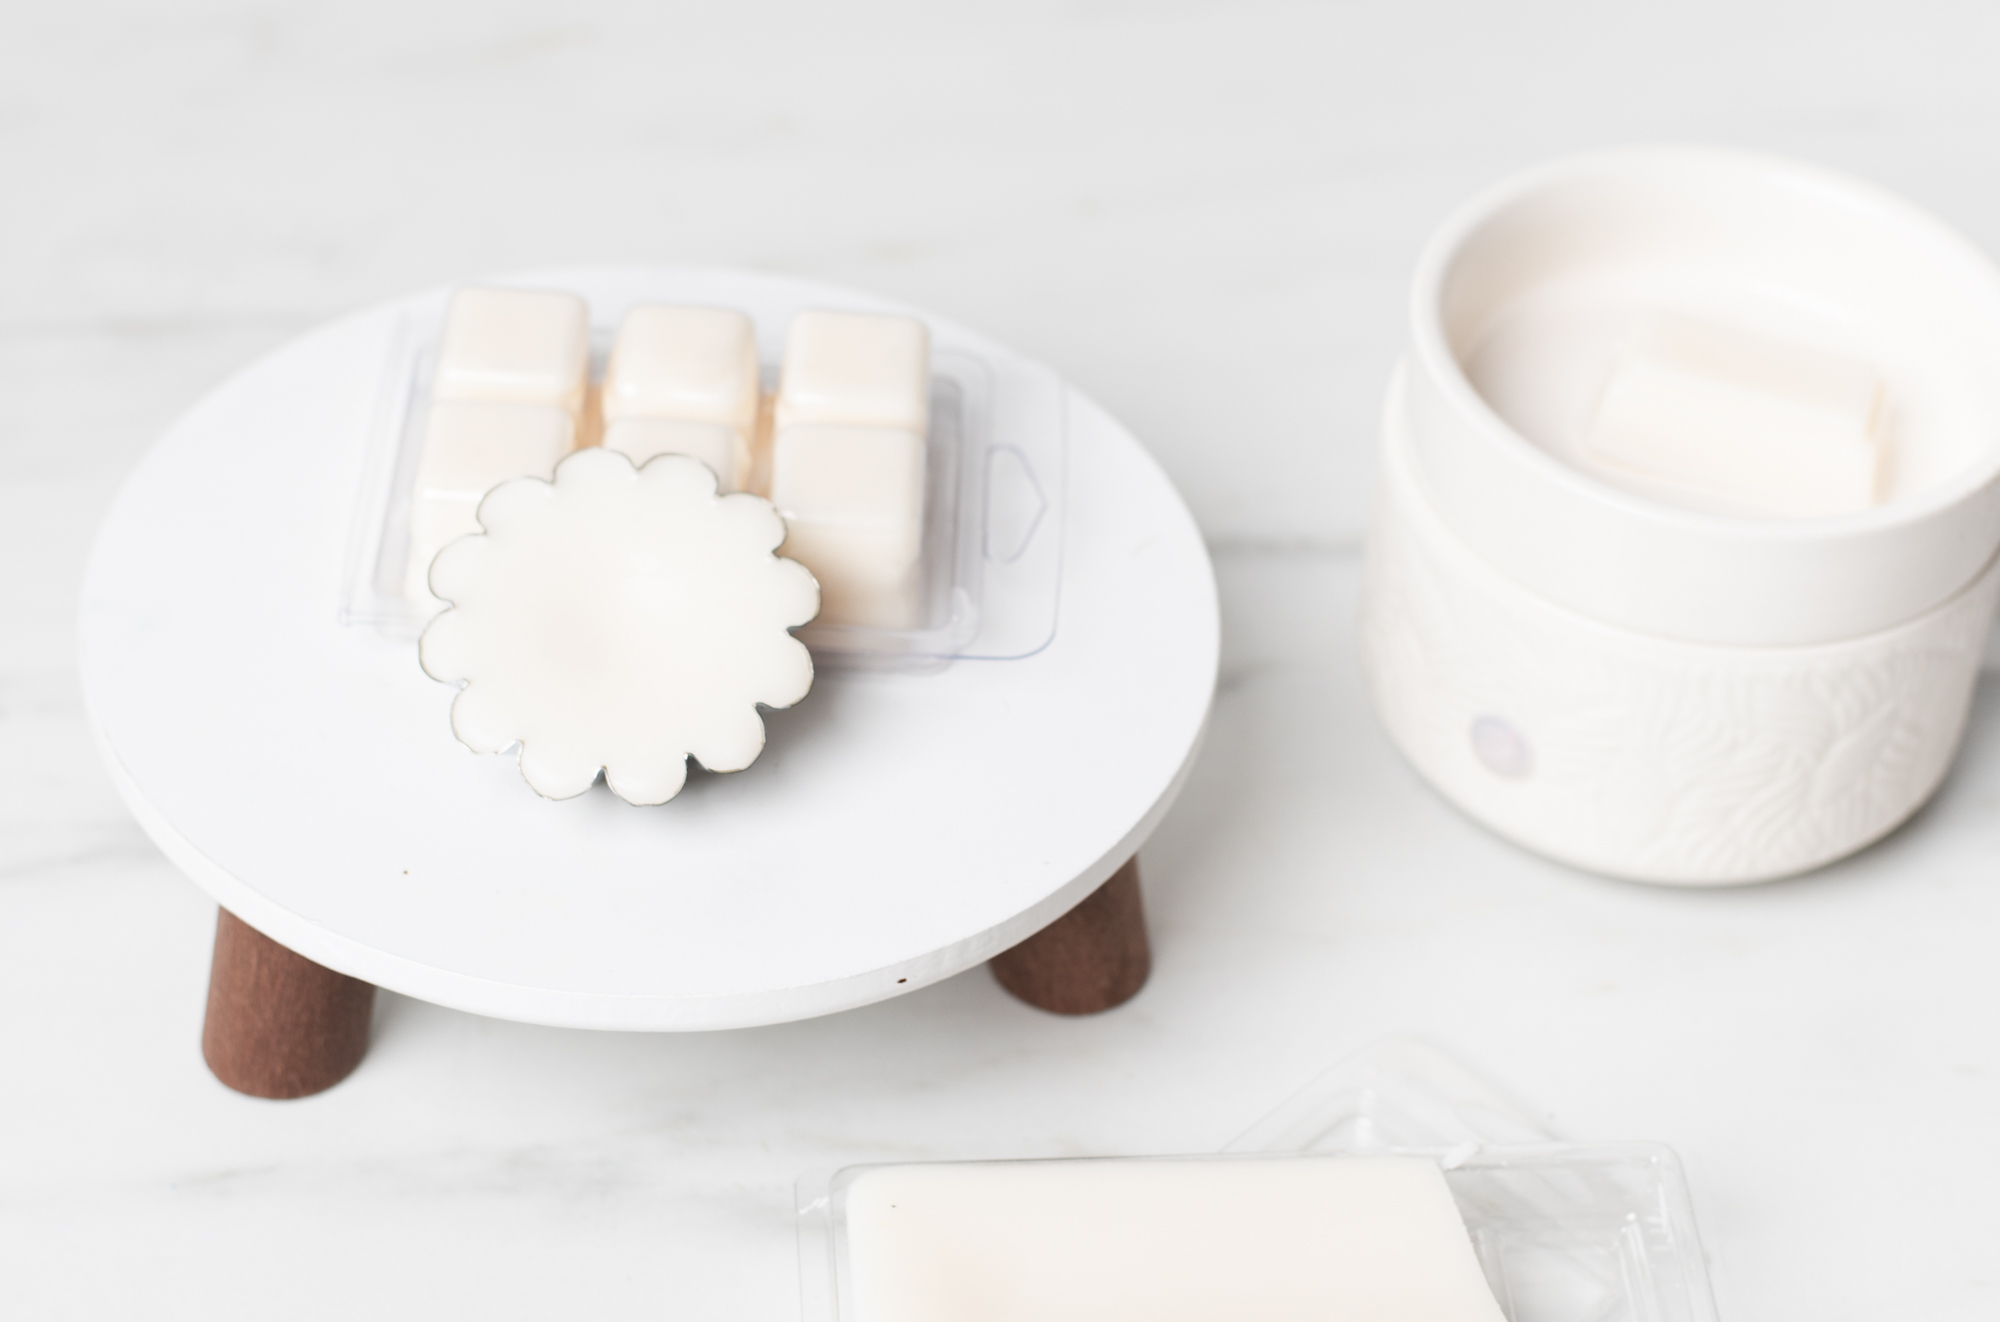 White wax melts are displayed on a white marble surface. One wax melt is shaped like a flower and one is a wax melt clamshell.